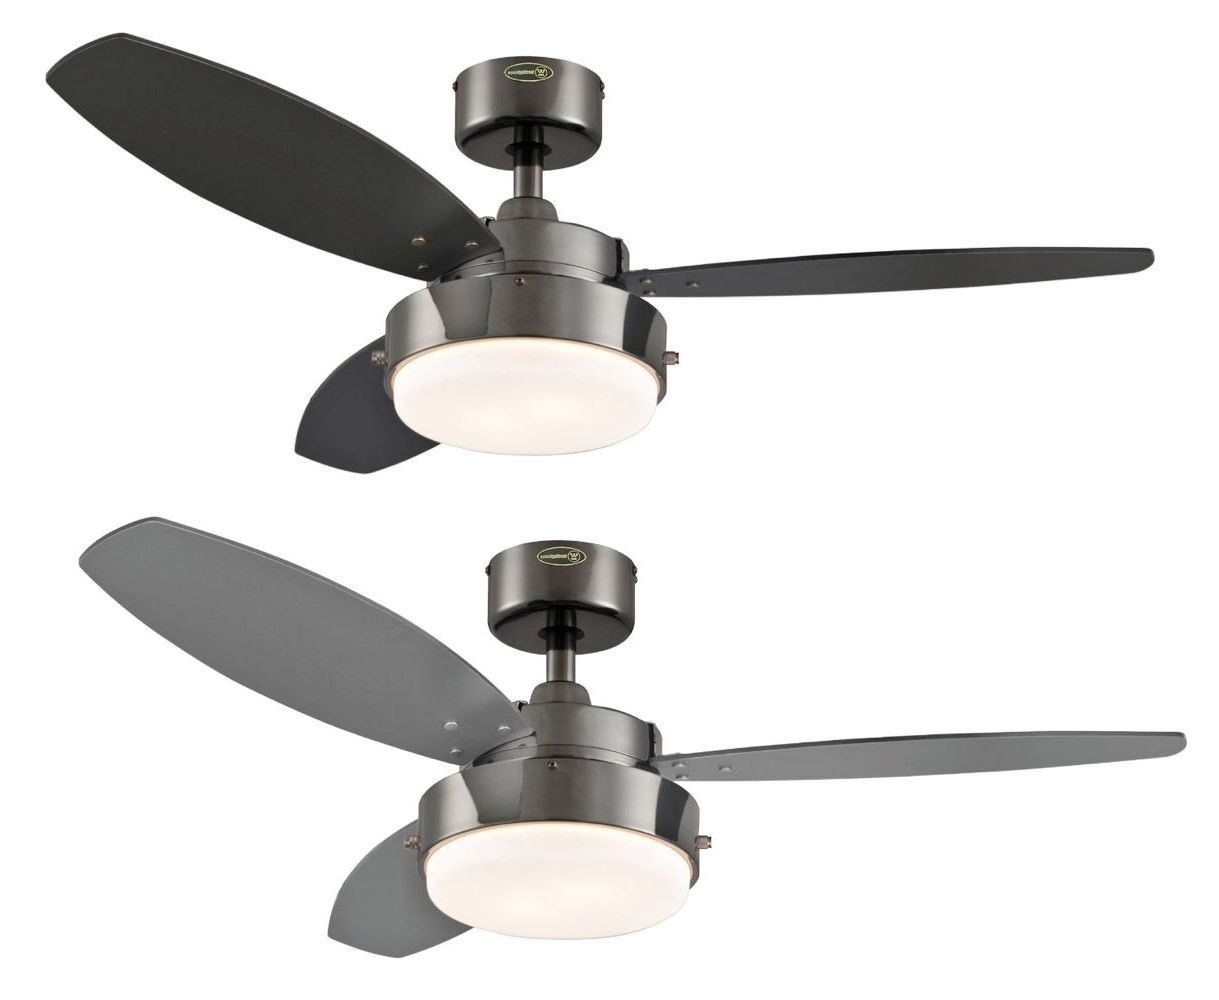 36 Inch Outdoor Ceiling Fans Throughout Current 36 Outdoor Ceiling Fan – Photos House Interior And Fan (View 4 of 20)